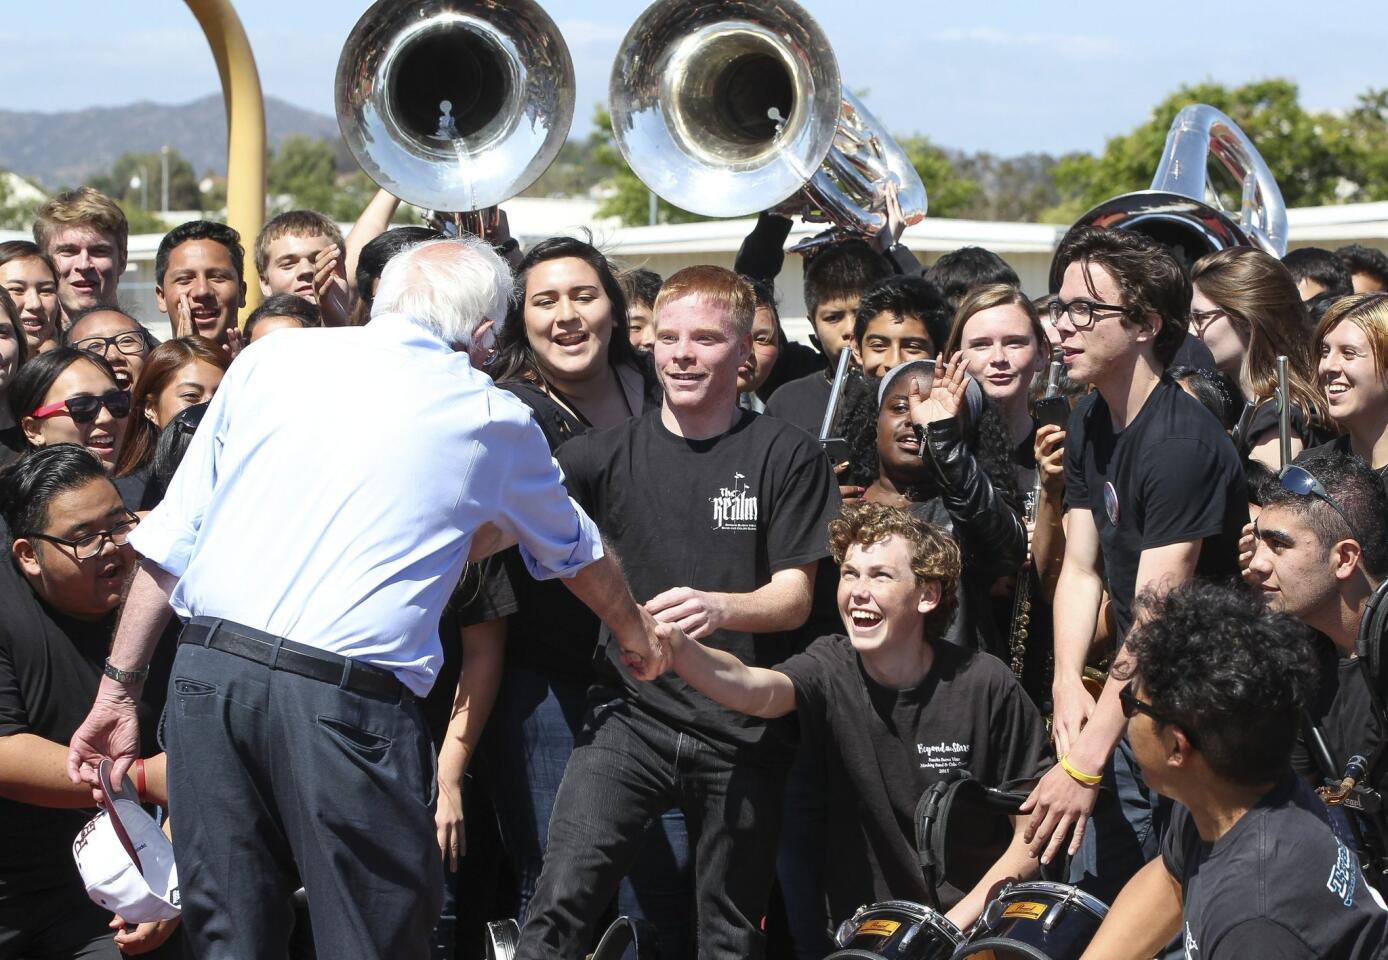 After speaking at the Rancho Buena Vista High School football stadium, Democratic presidential candidate Bernie Sanders shakes hands with members of Rancho Buena Vista's marching band after he posed for a picture with them.